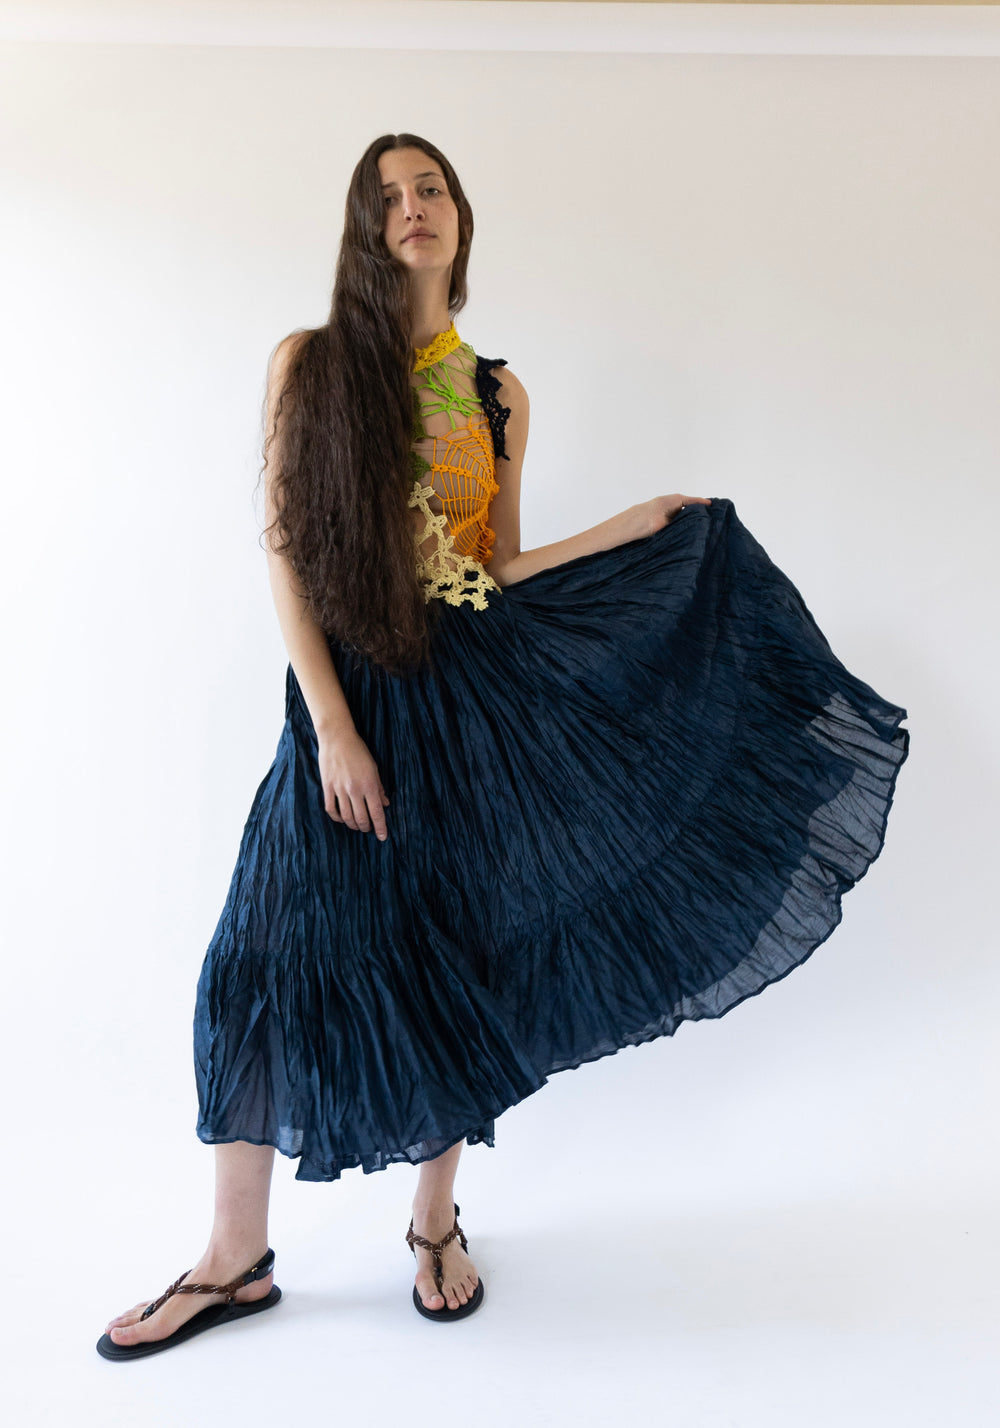 Caen Pleated Maxi Skirt in Eclipse